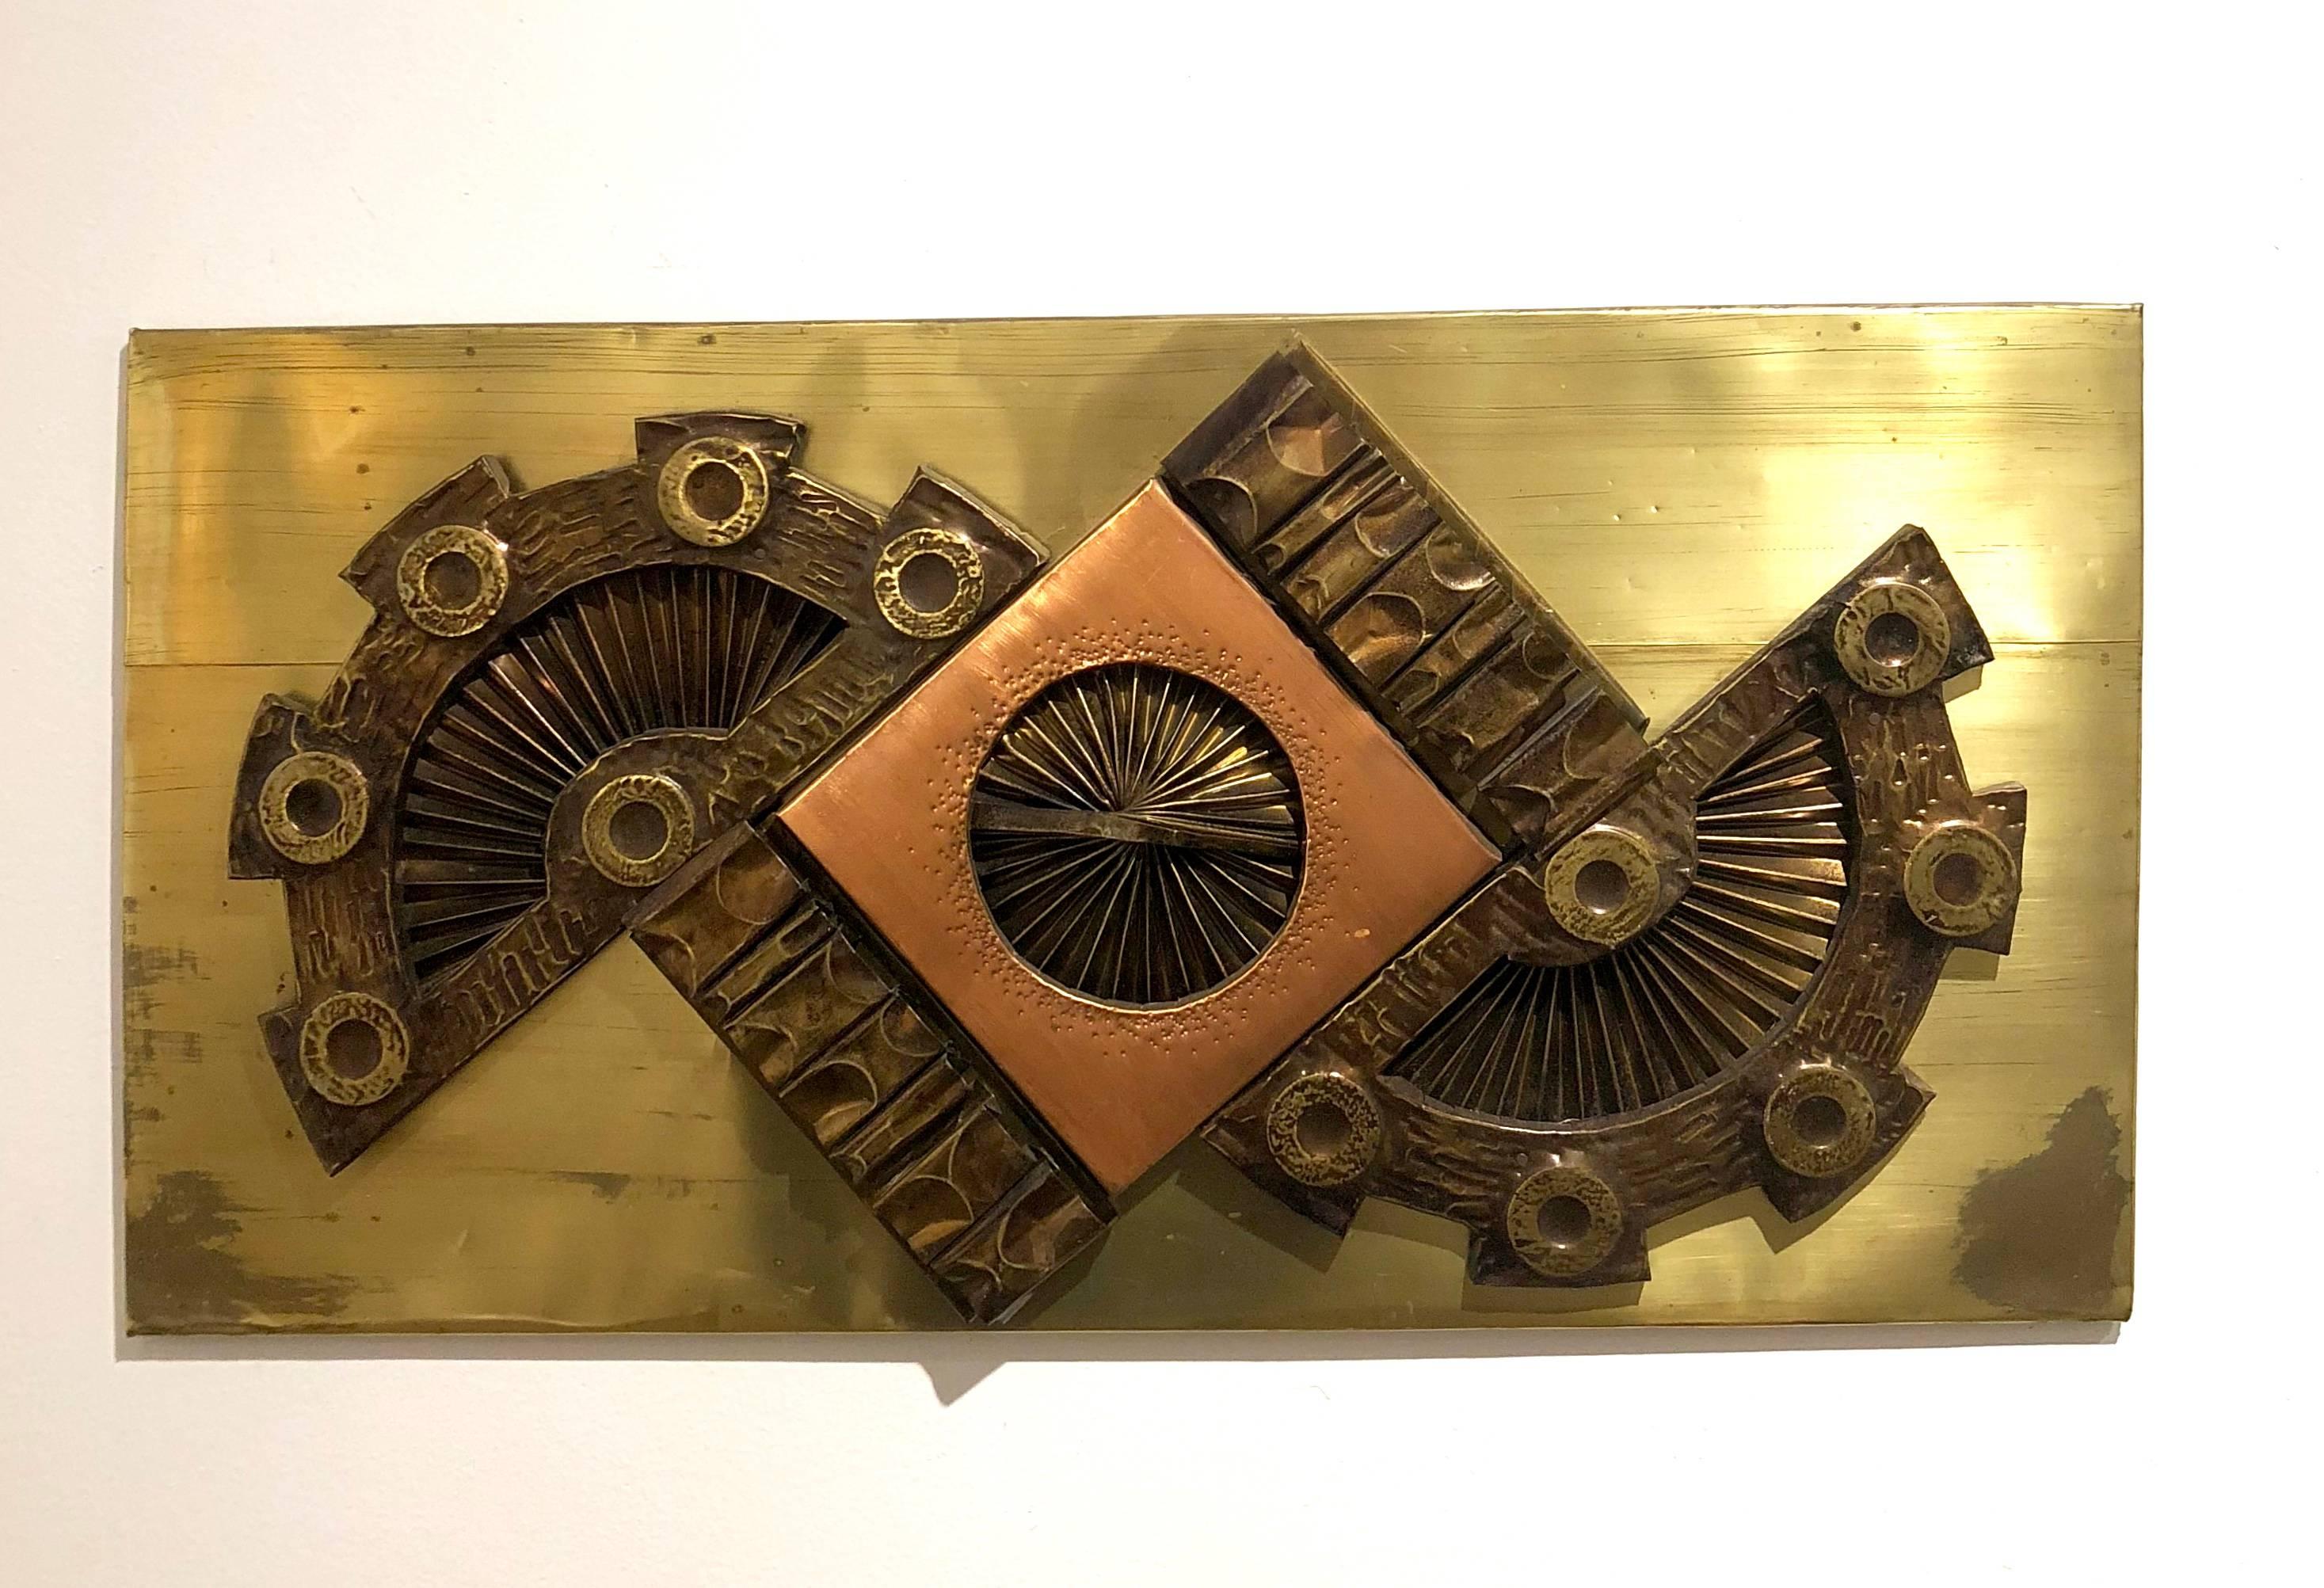 American 1970s Brutalist Metal Wall Plaque in Copper and Brass by Stephen Chun